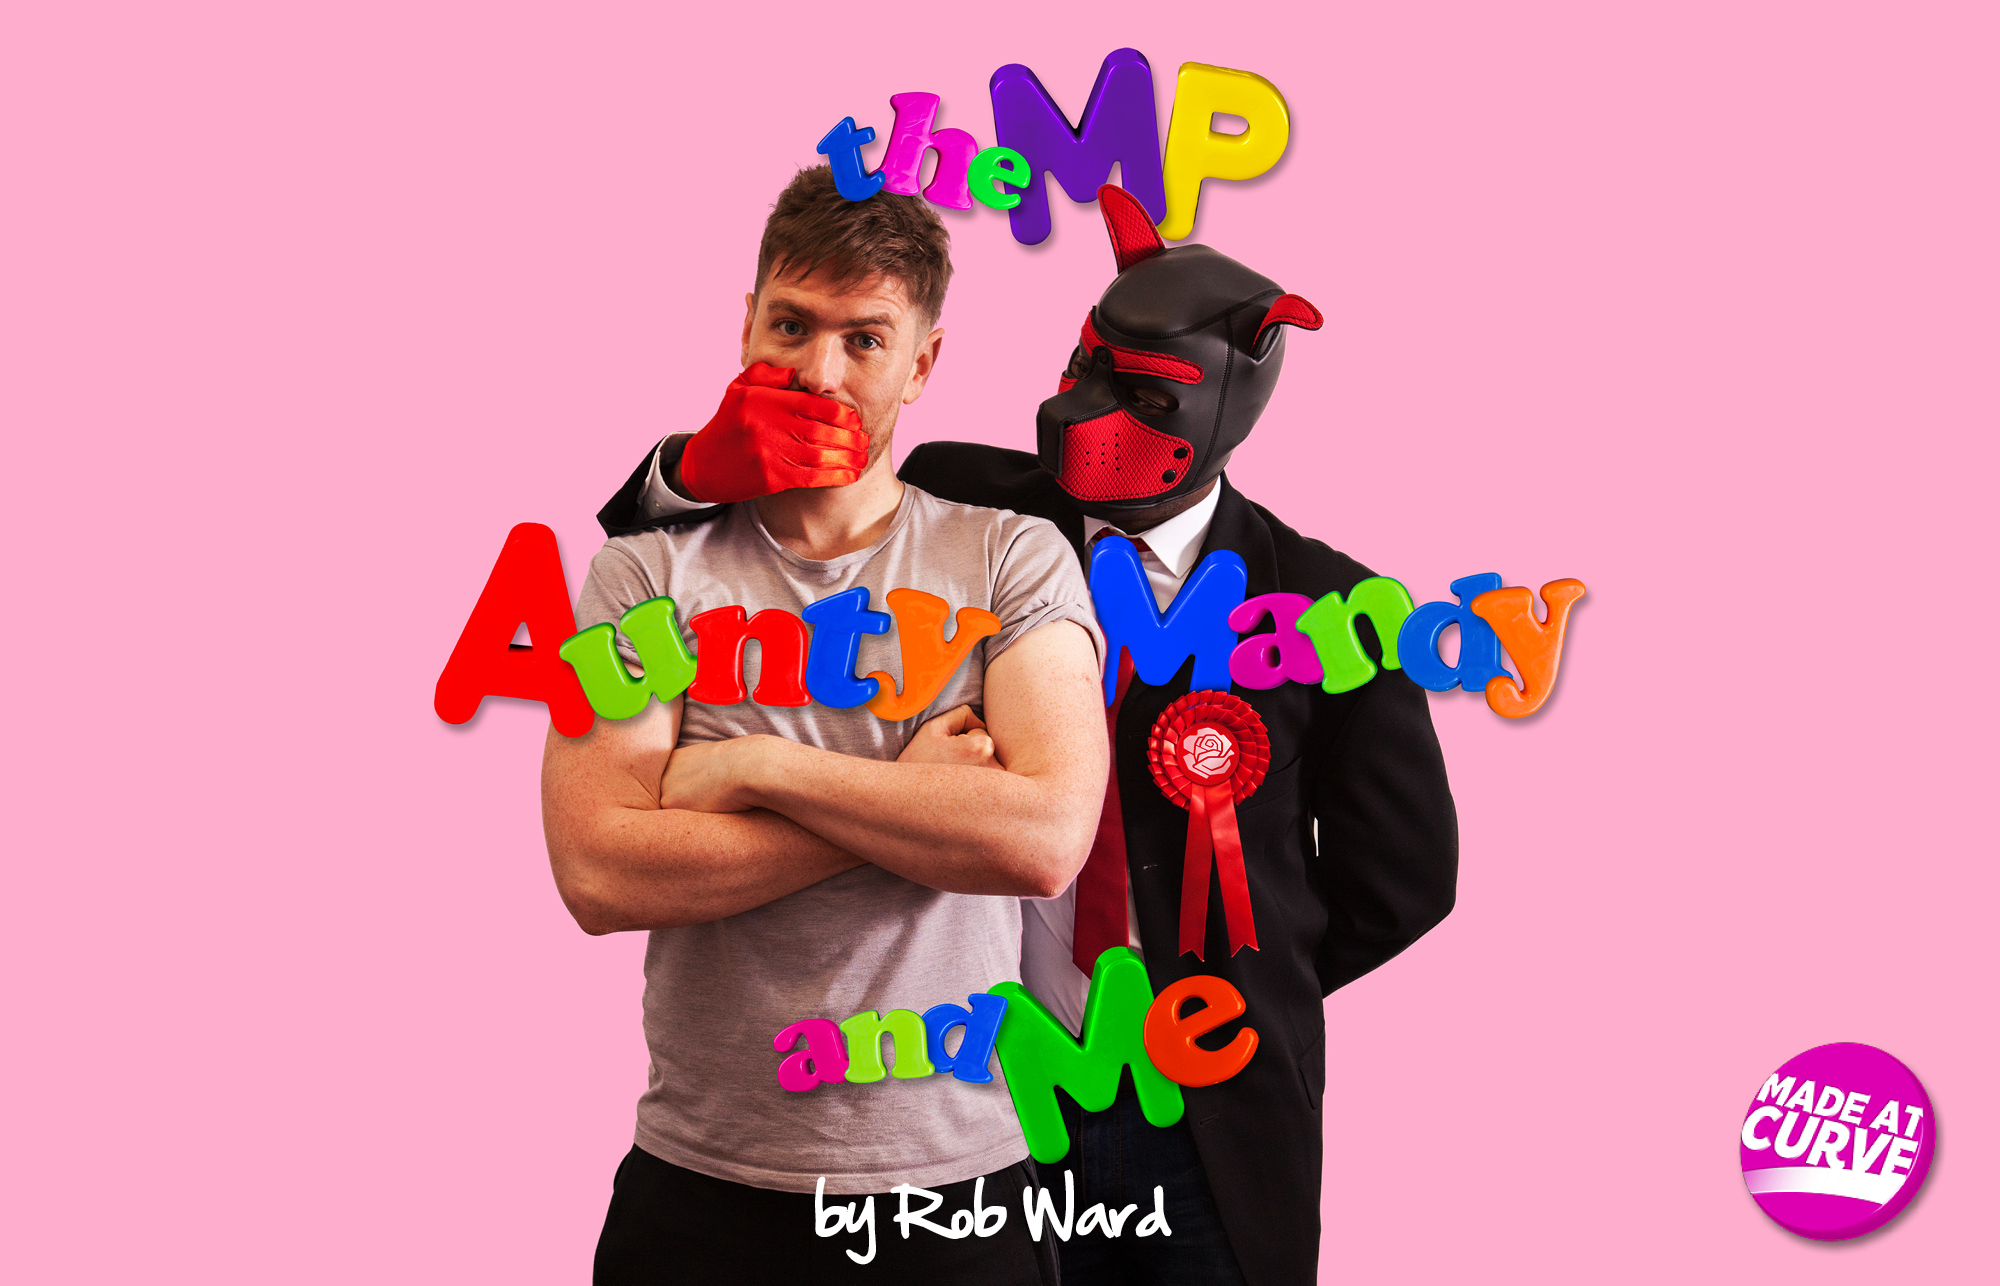 Rob Ward as Dom has his mouth covered from behind by a person wearing a leather dog mask, red silk gloves, a suit and a red rosette. Fridge magnet letters read The MP, Aunty Mandy and Me against a pink background.